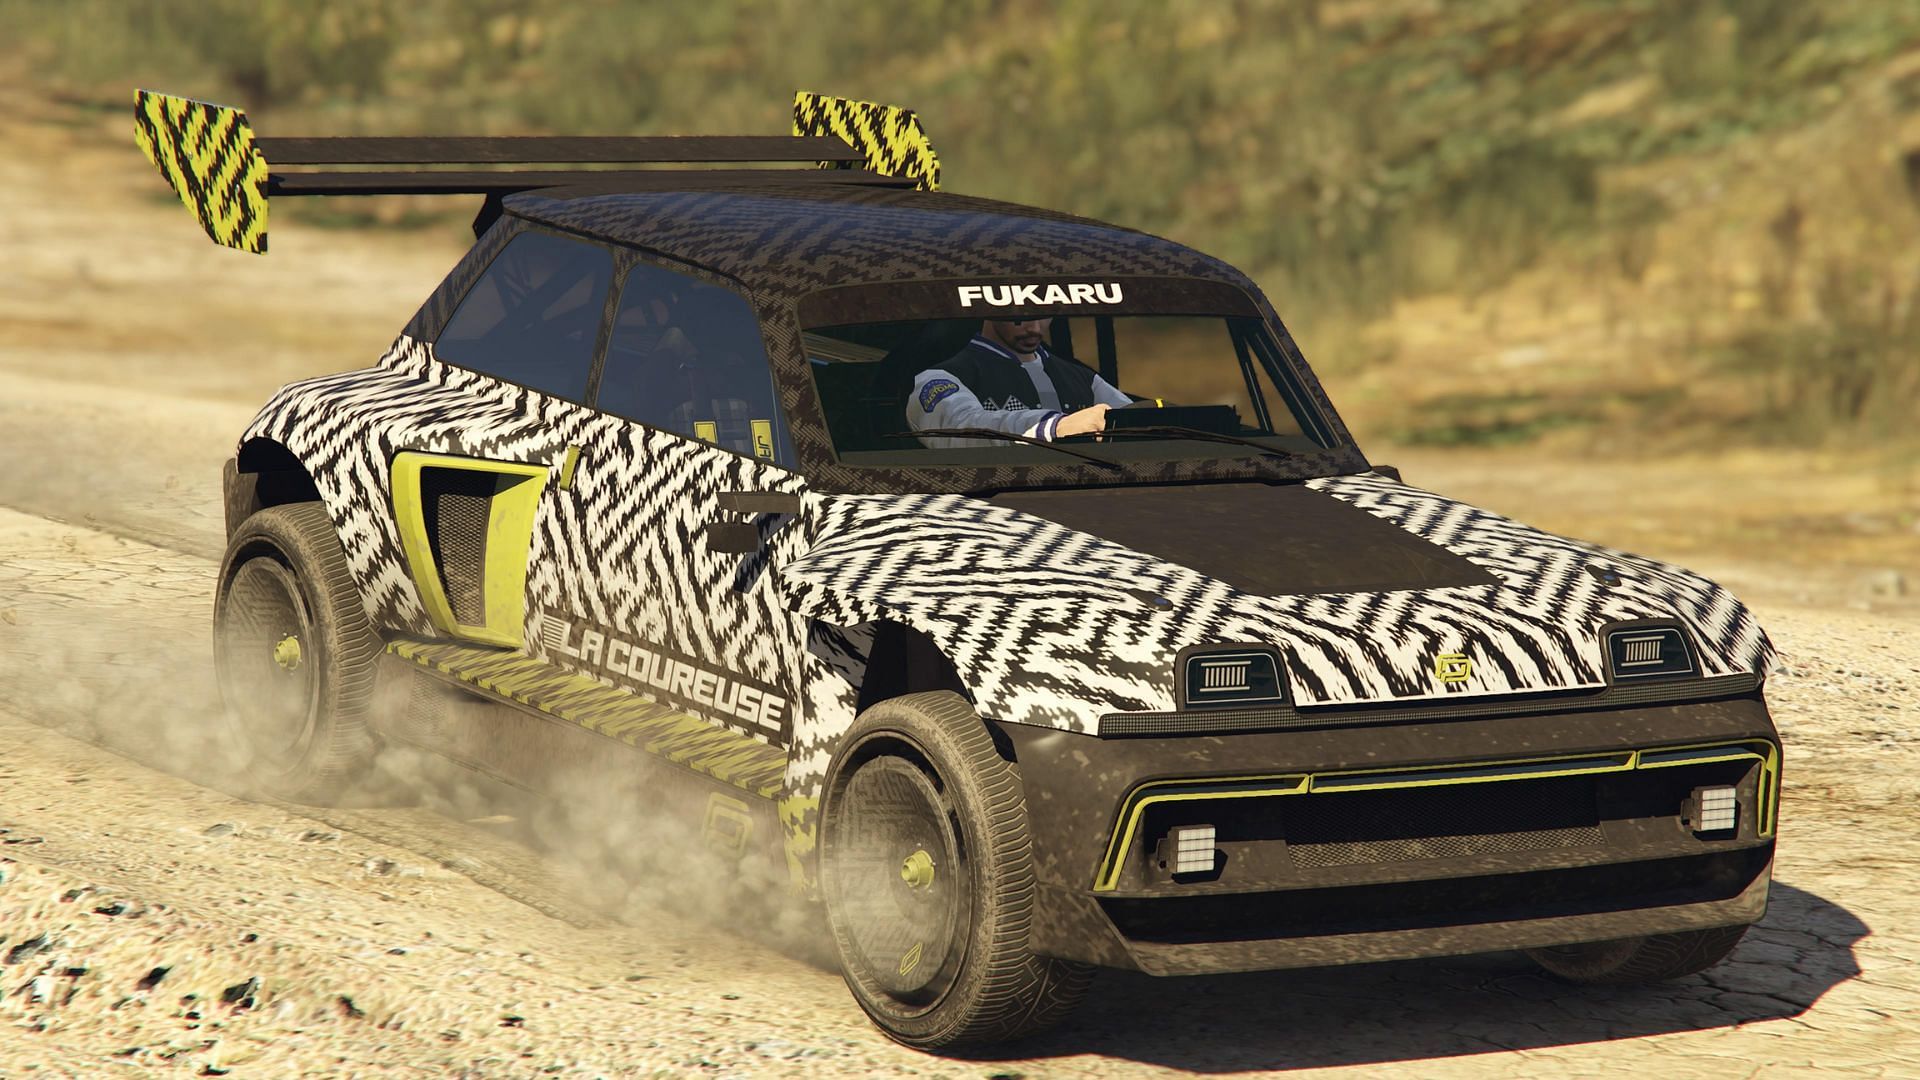 Is it worth purchasing Penaud La Coureuse in GTA Online after the 420 update